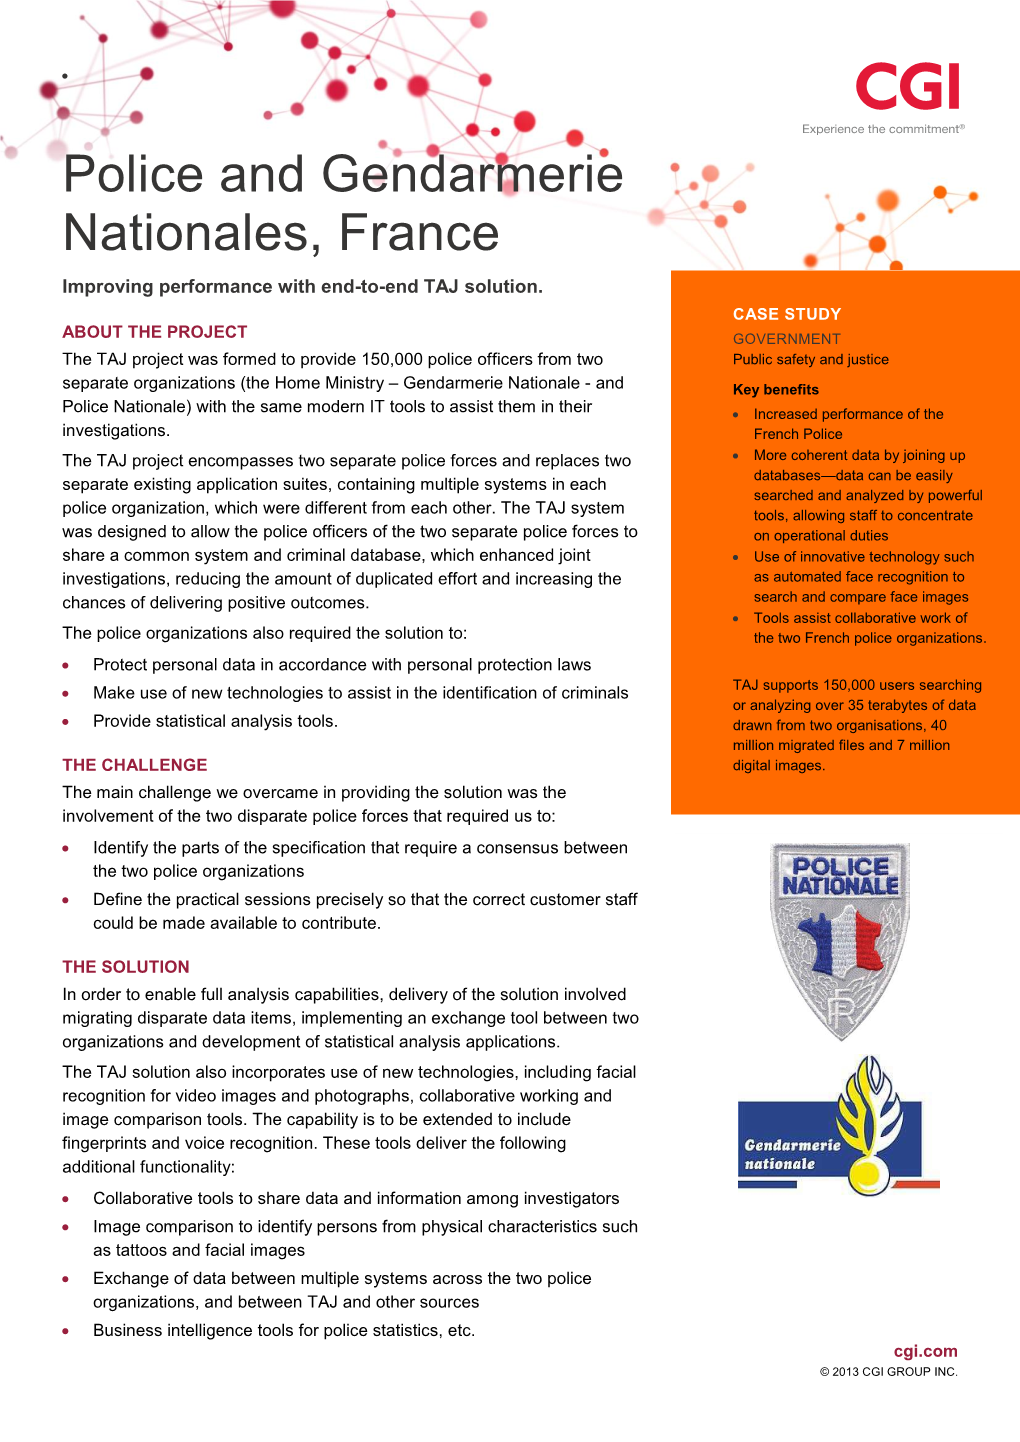 Police and Gendarmerie Nationales, France Improving Performance with End-To-End TAJ Solution